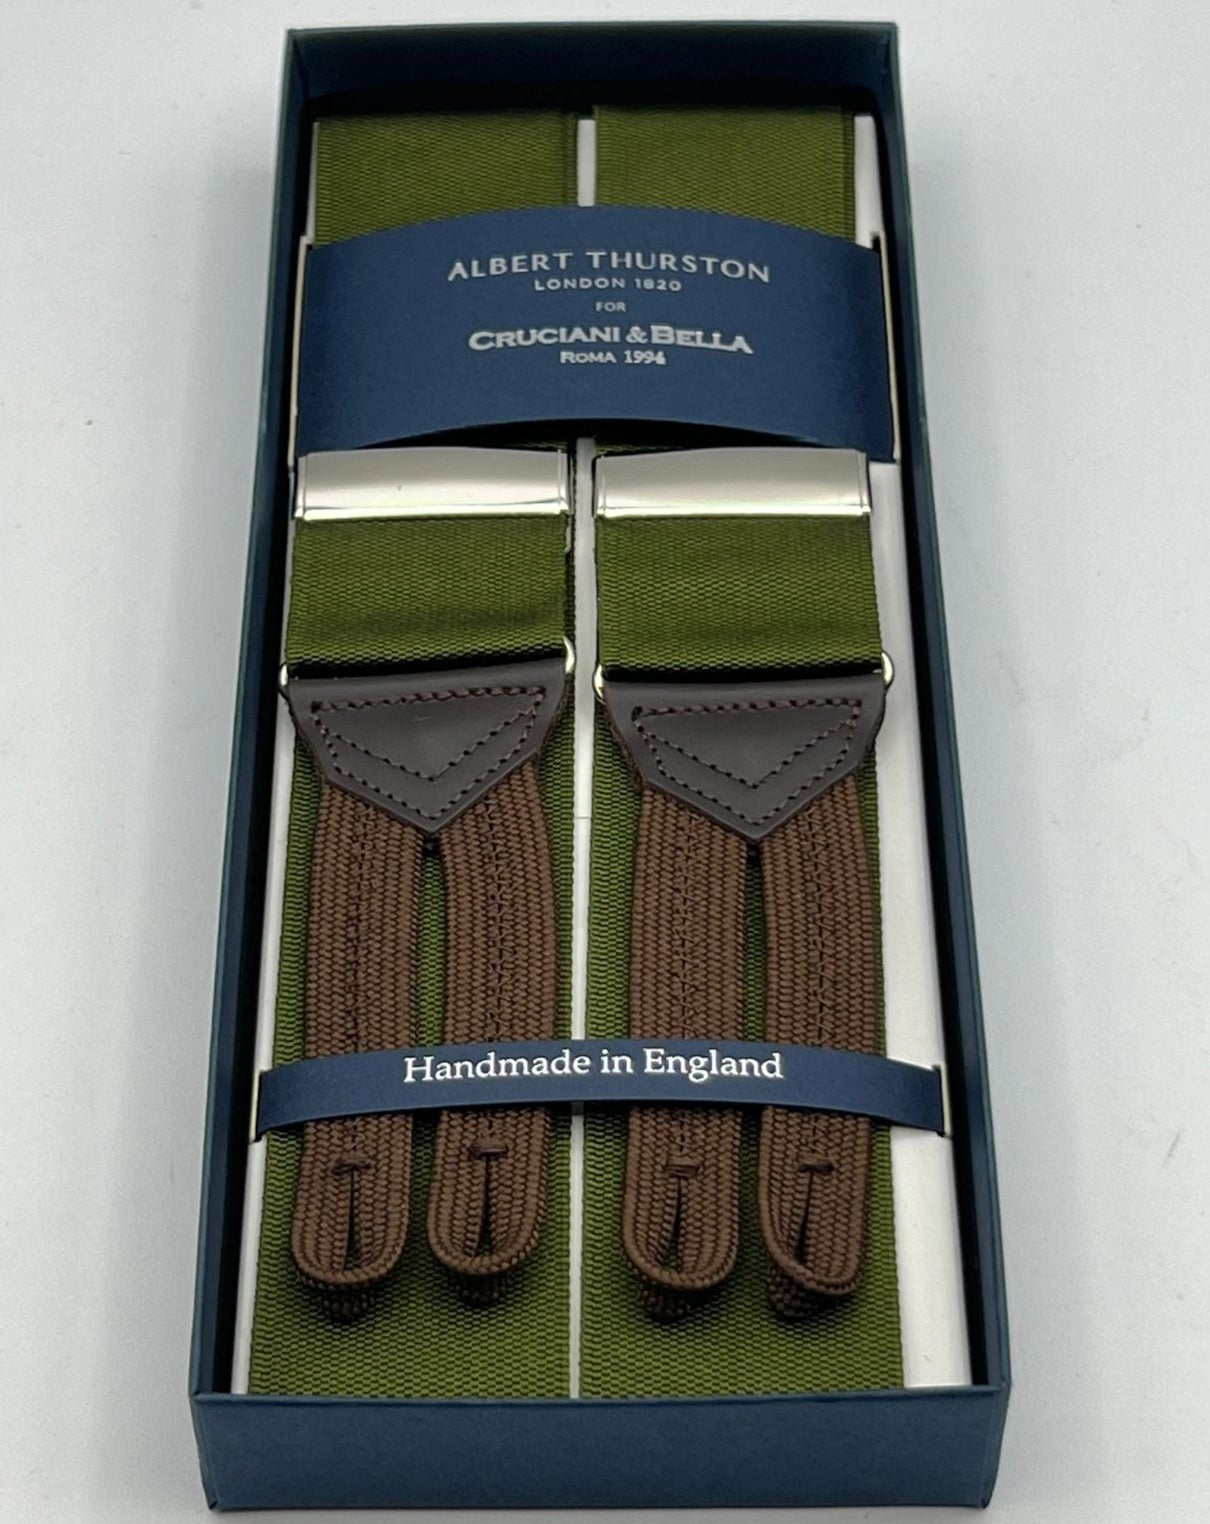 Albert Thurston for Cruciani & Bella Made in England Adjustable Sizing 40 mm Woven Barathea  Olive Plain Braces Braid ends Y-Shaped Nickel Fittings Size: XL